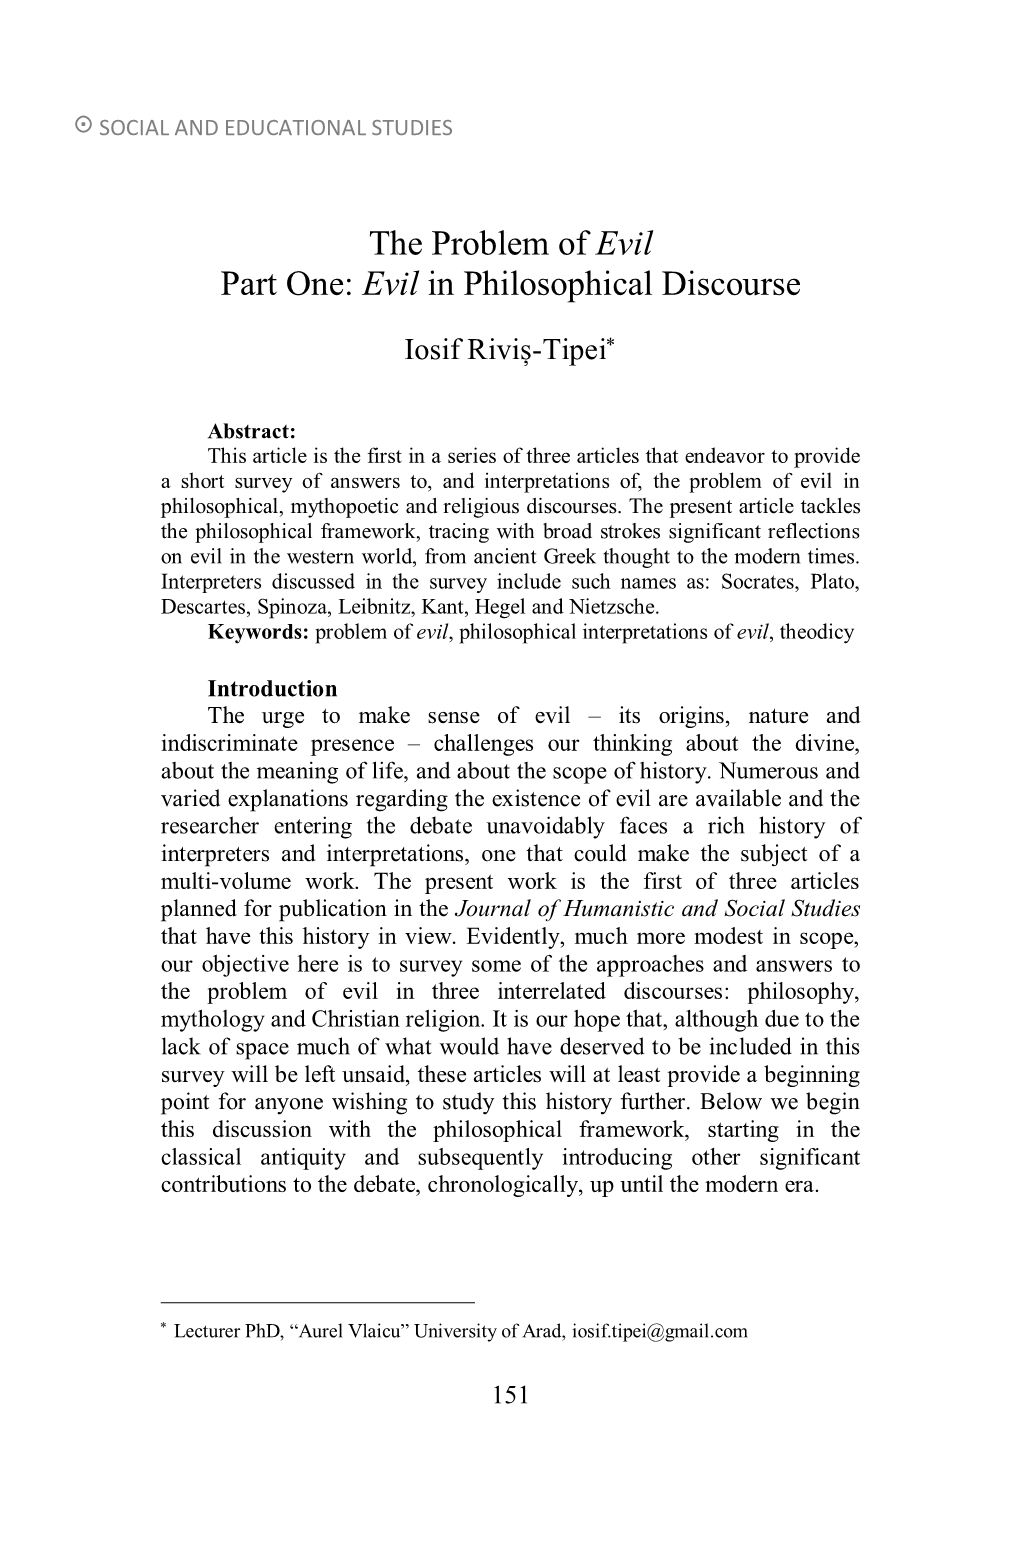 Evil in Philosophical Discourse